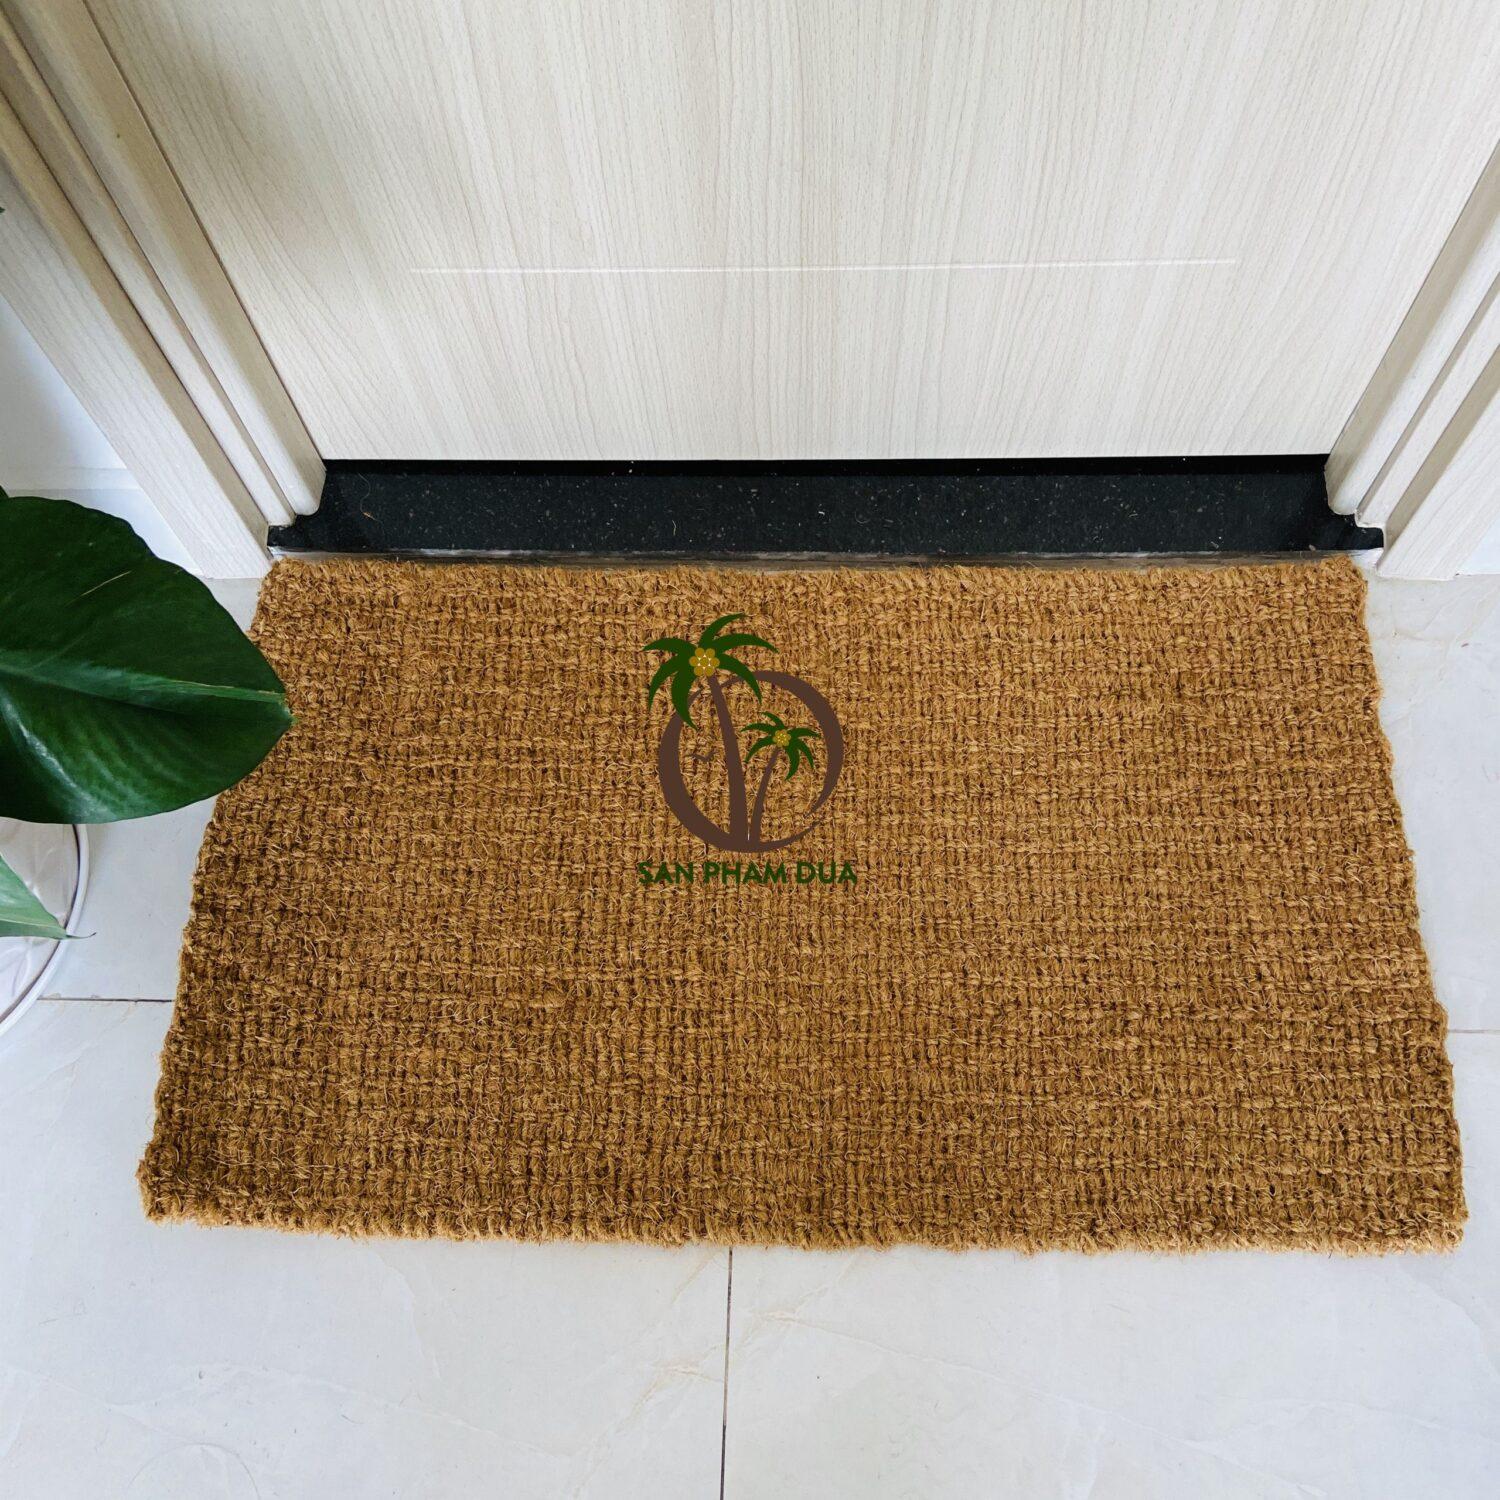 Why are coconut fiber mats loved by everyone?